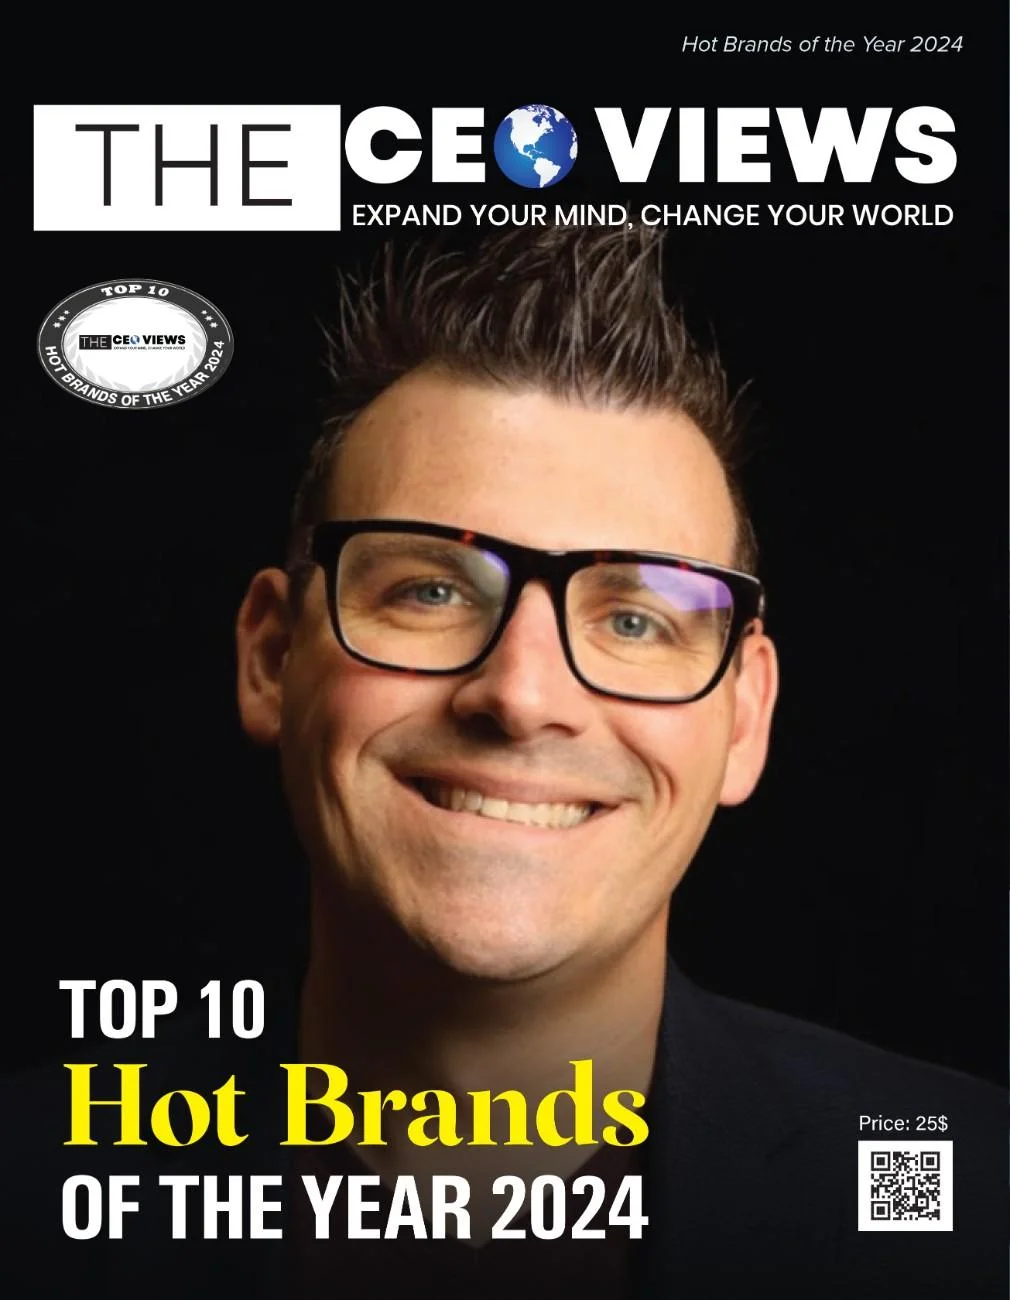 Hot brands cover